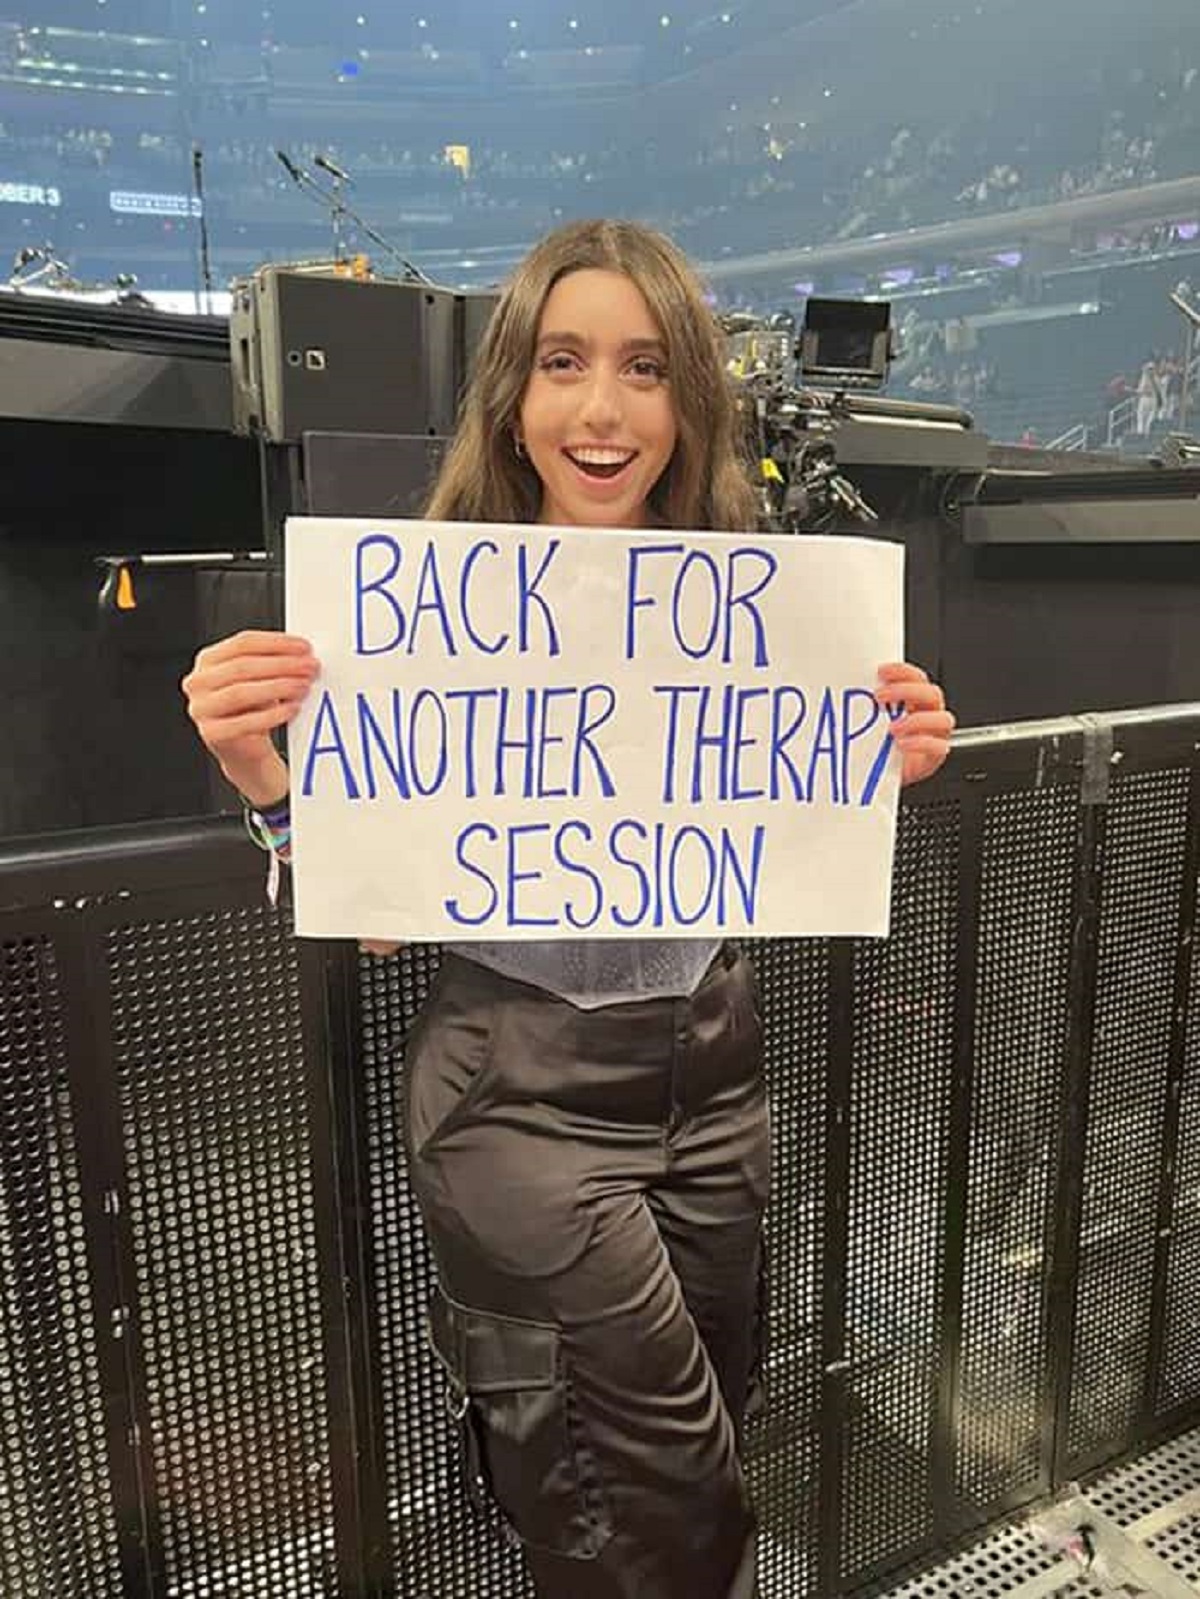 39 Funny and Clever Concert Signs